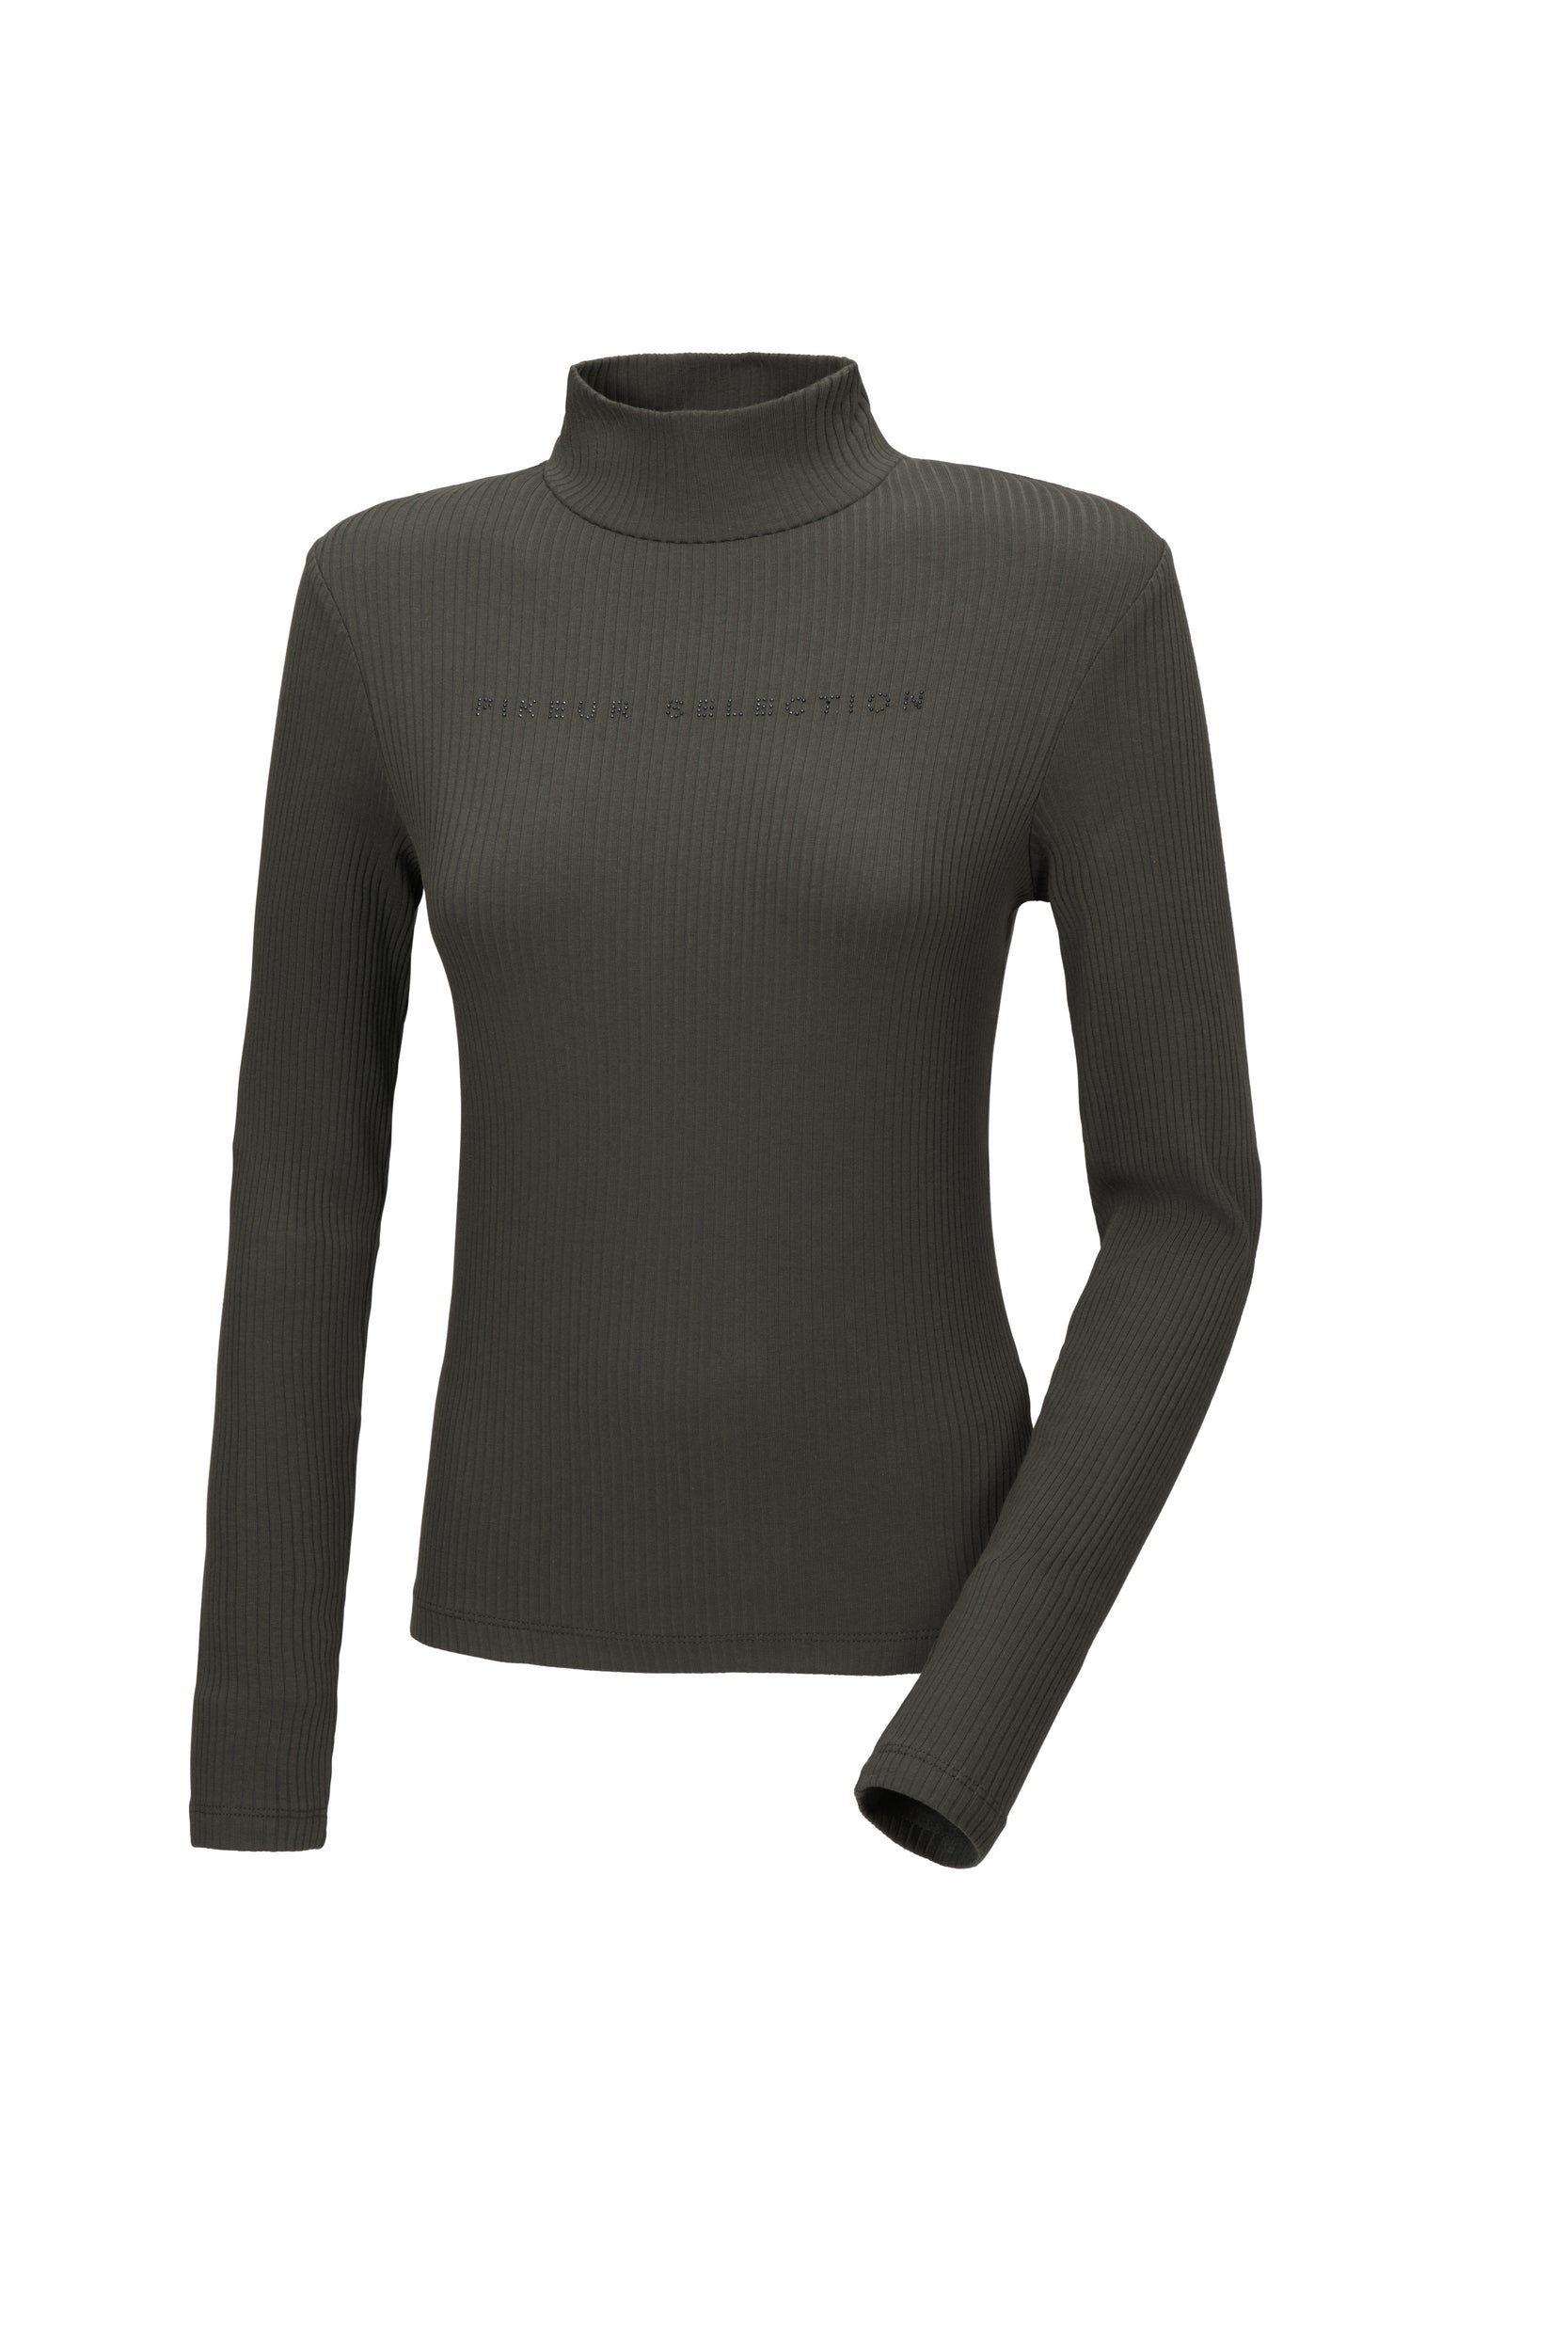 Pikeur Roll neck top in Black Olive